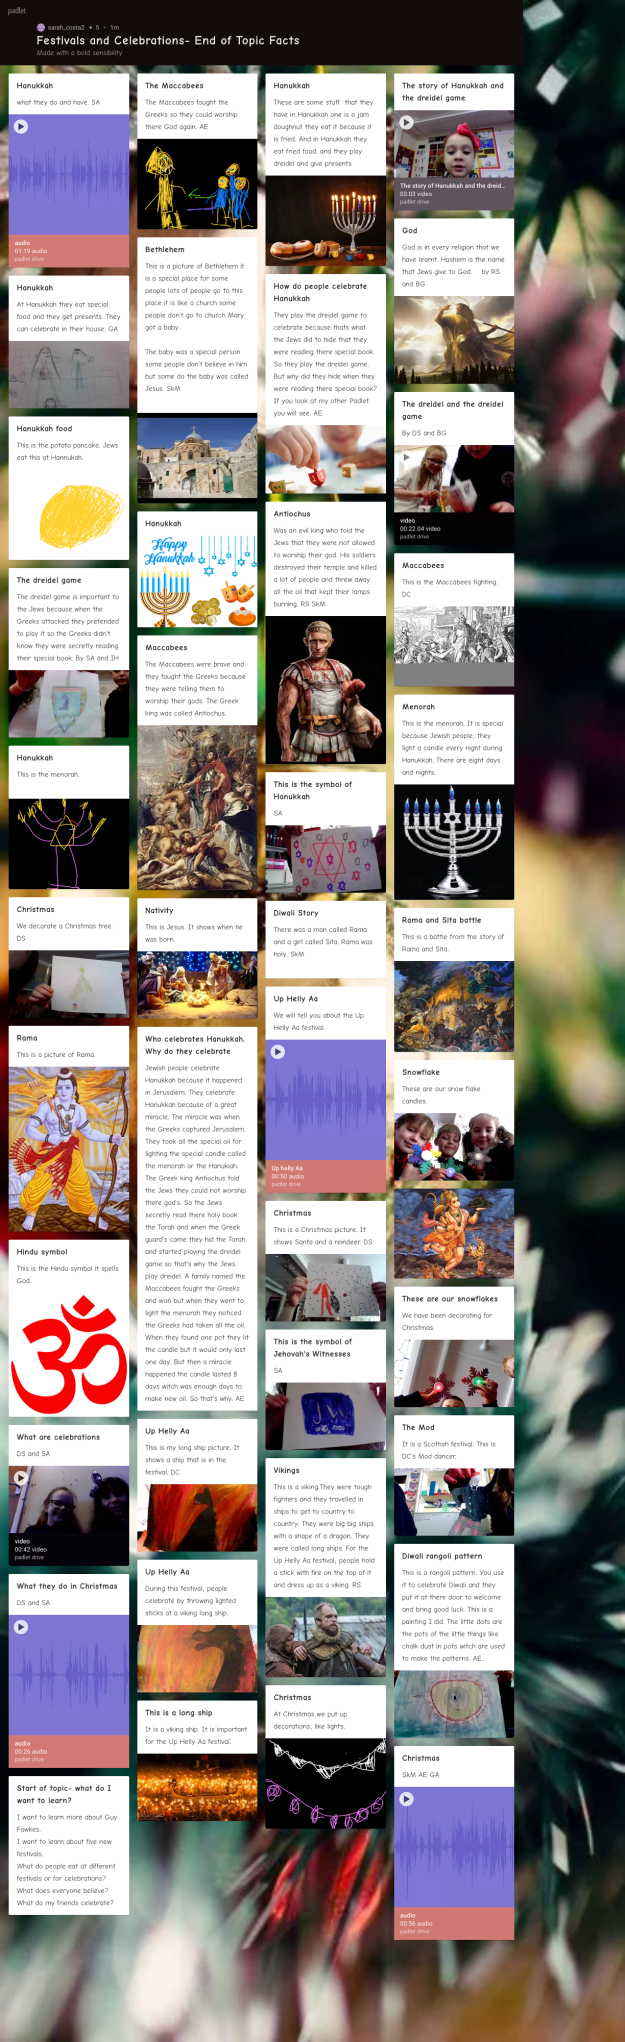 Padlet End of T2 Topic Facts